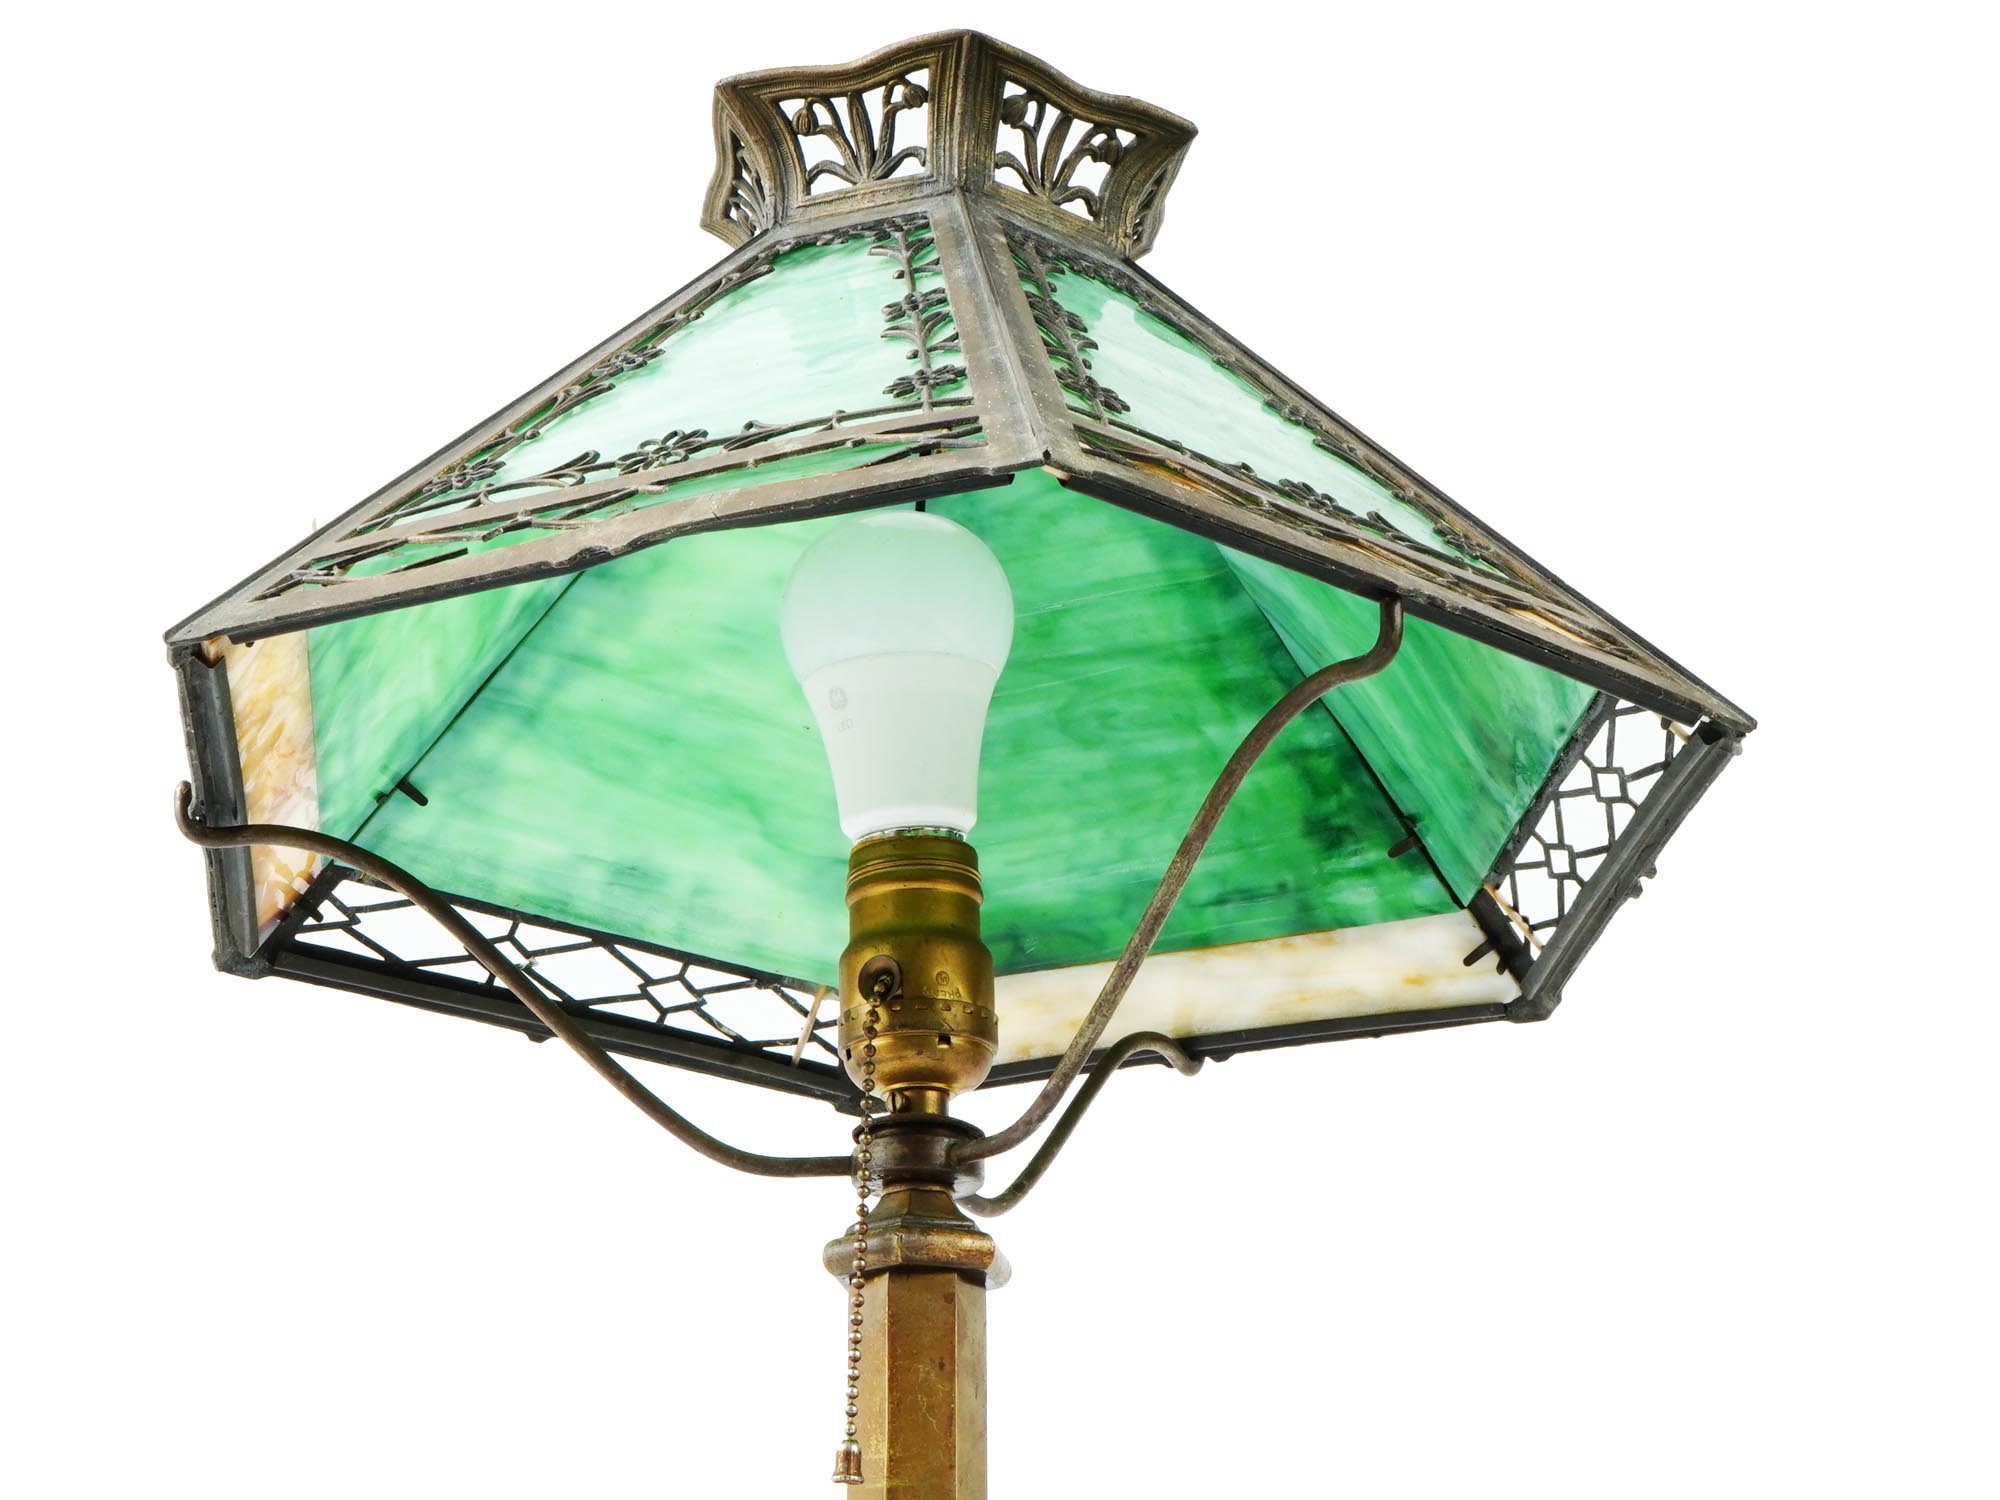 ART NOUVEAU TIFFANY MANNER STAINED GLASS TABLE LAMP PIC-6